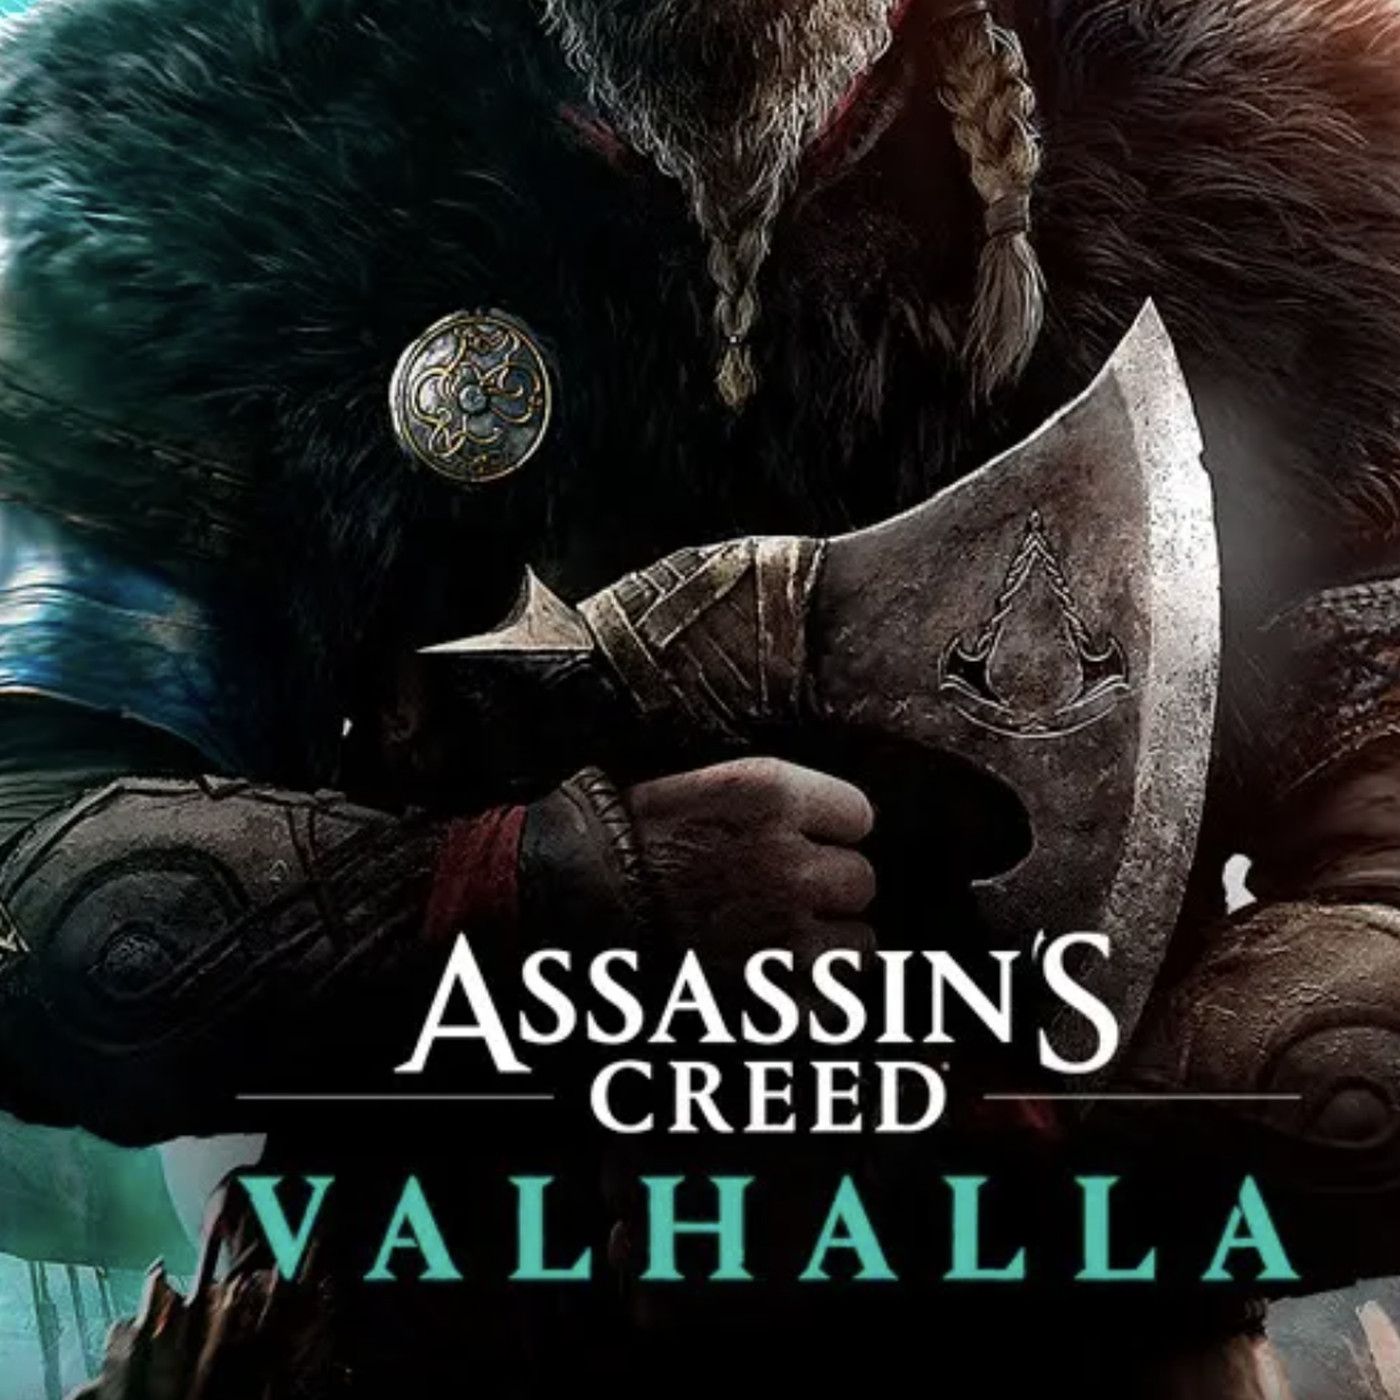 Assassin's Creed Valhalla is Assassin's Creed with vikings